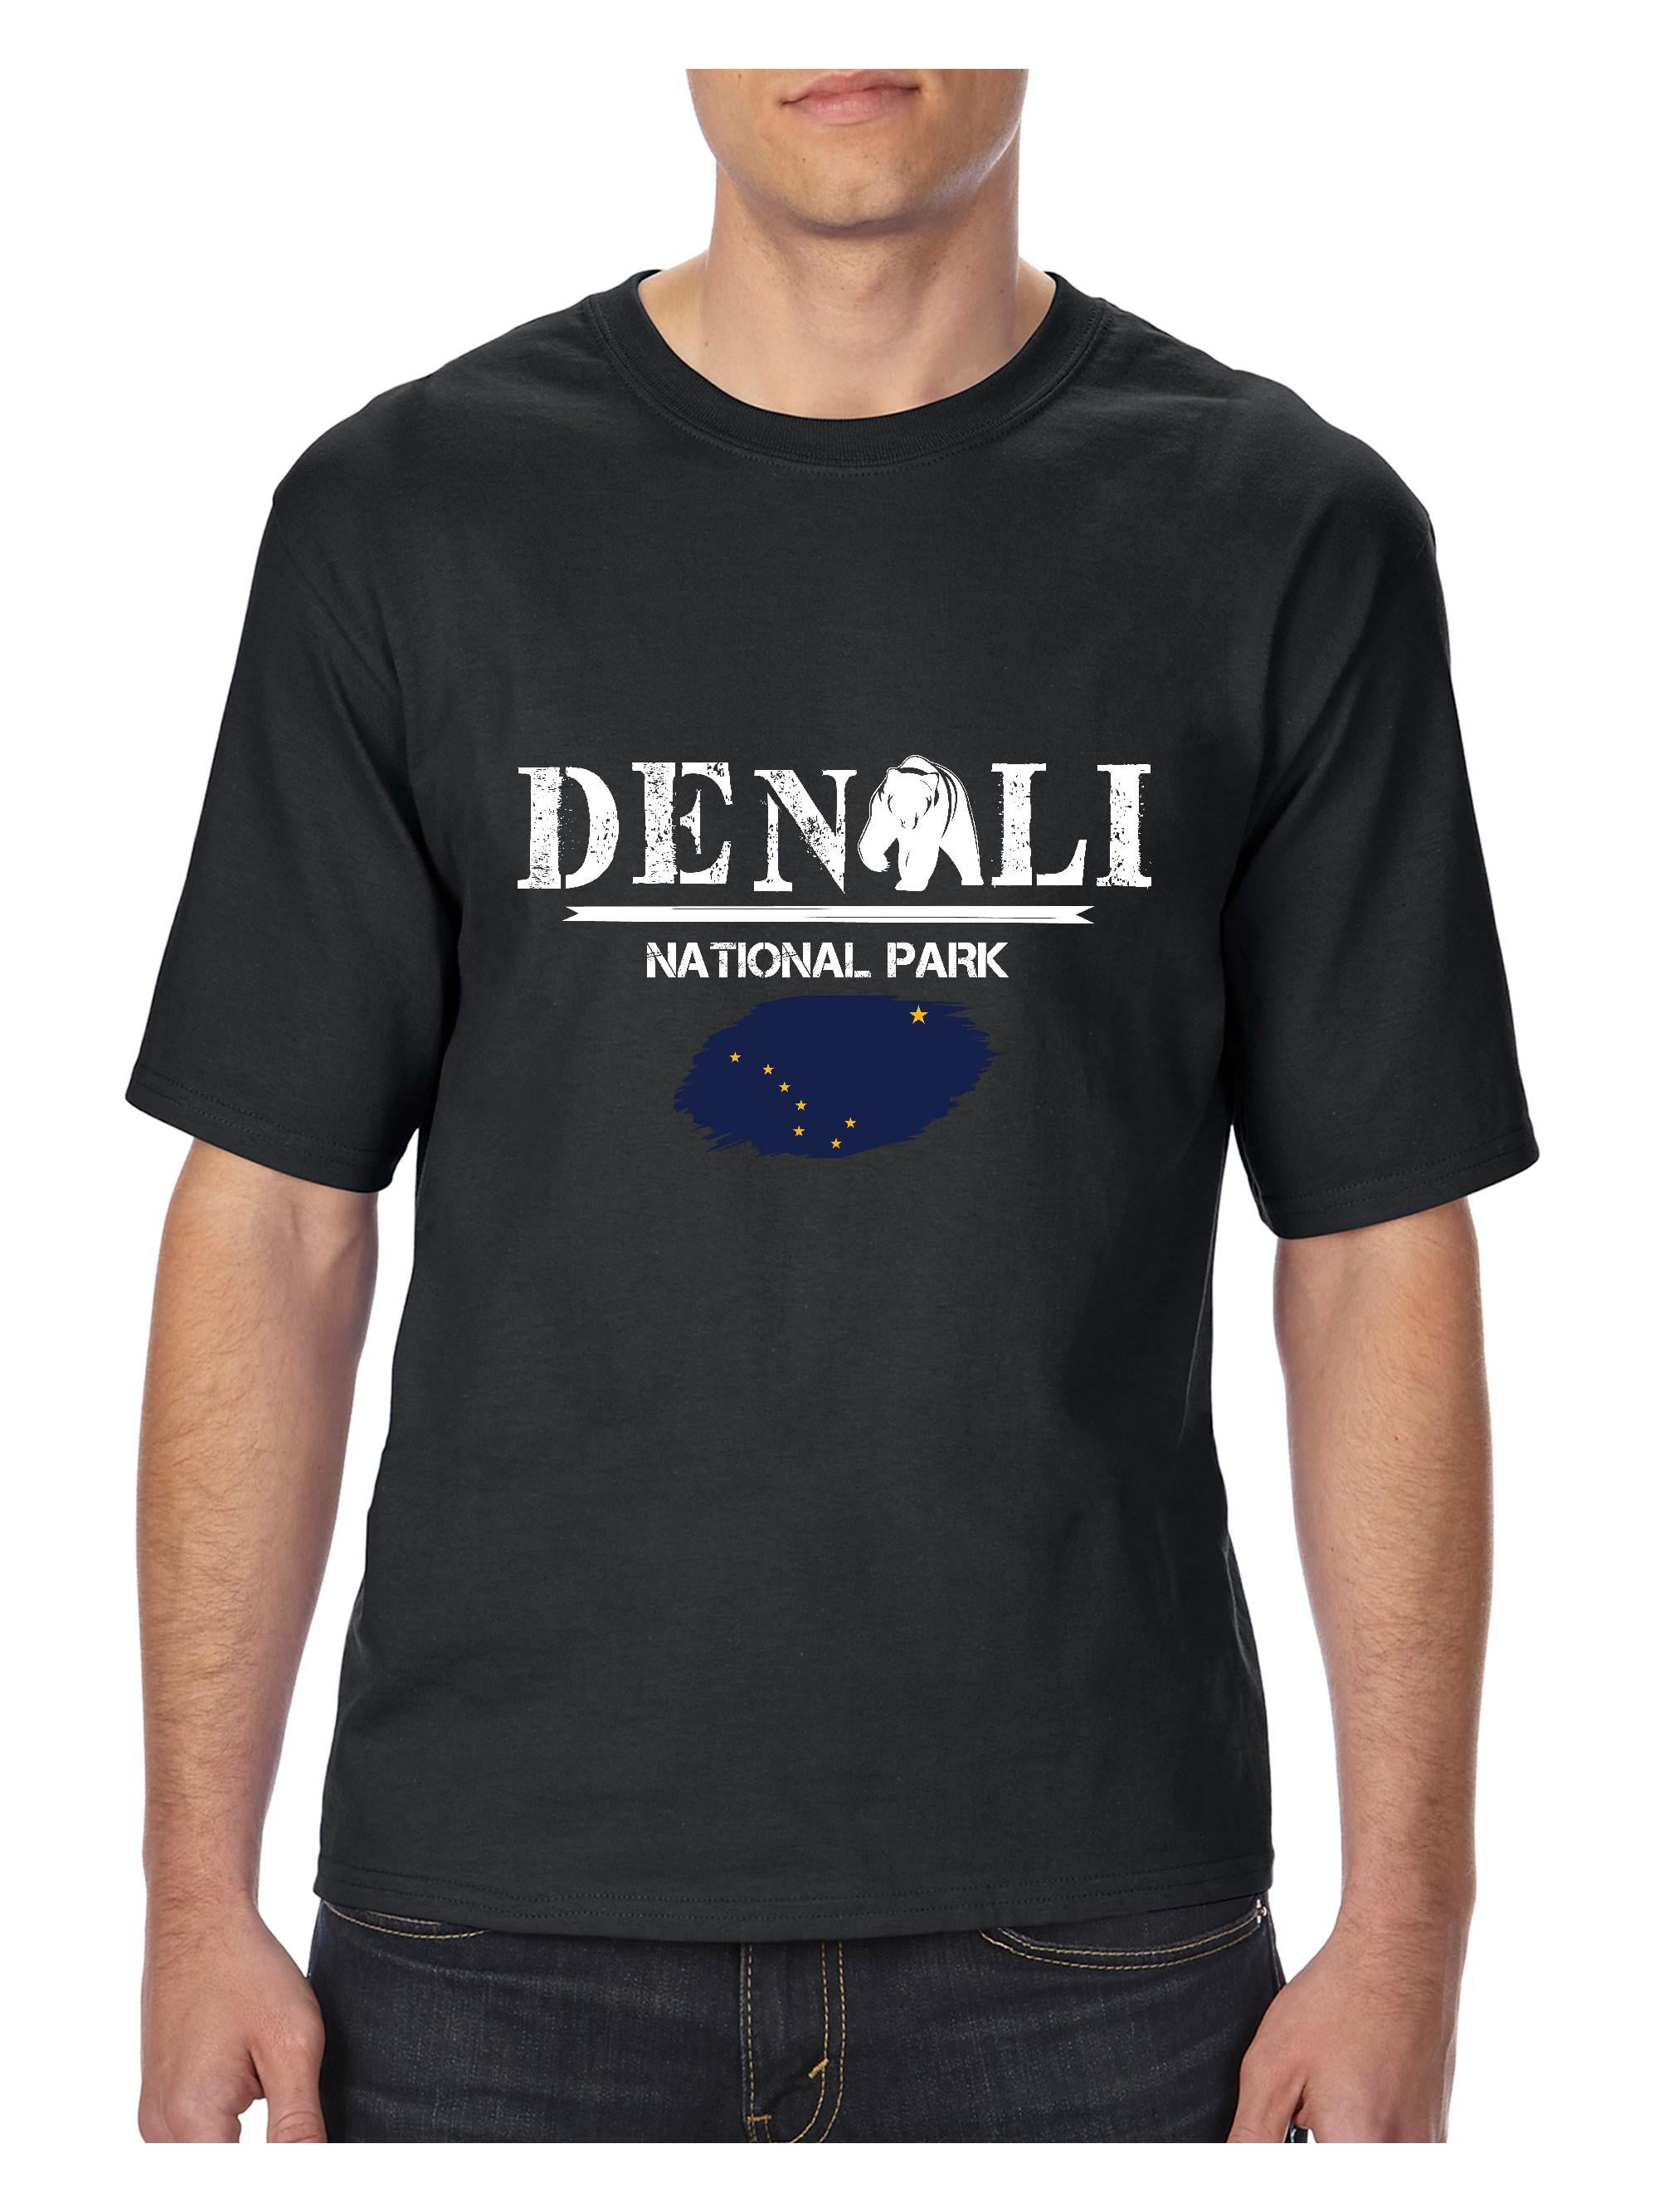 Normal is Boring - Big Men's T-Shirt, up to Tall Size 3XLT - Denali  National Park 